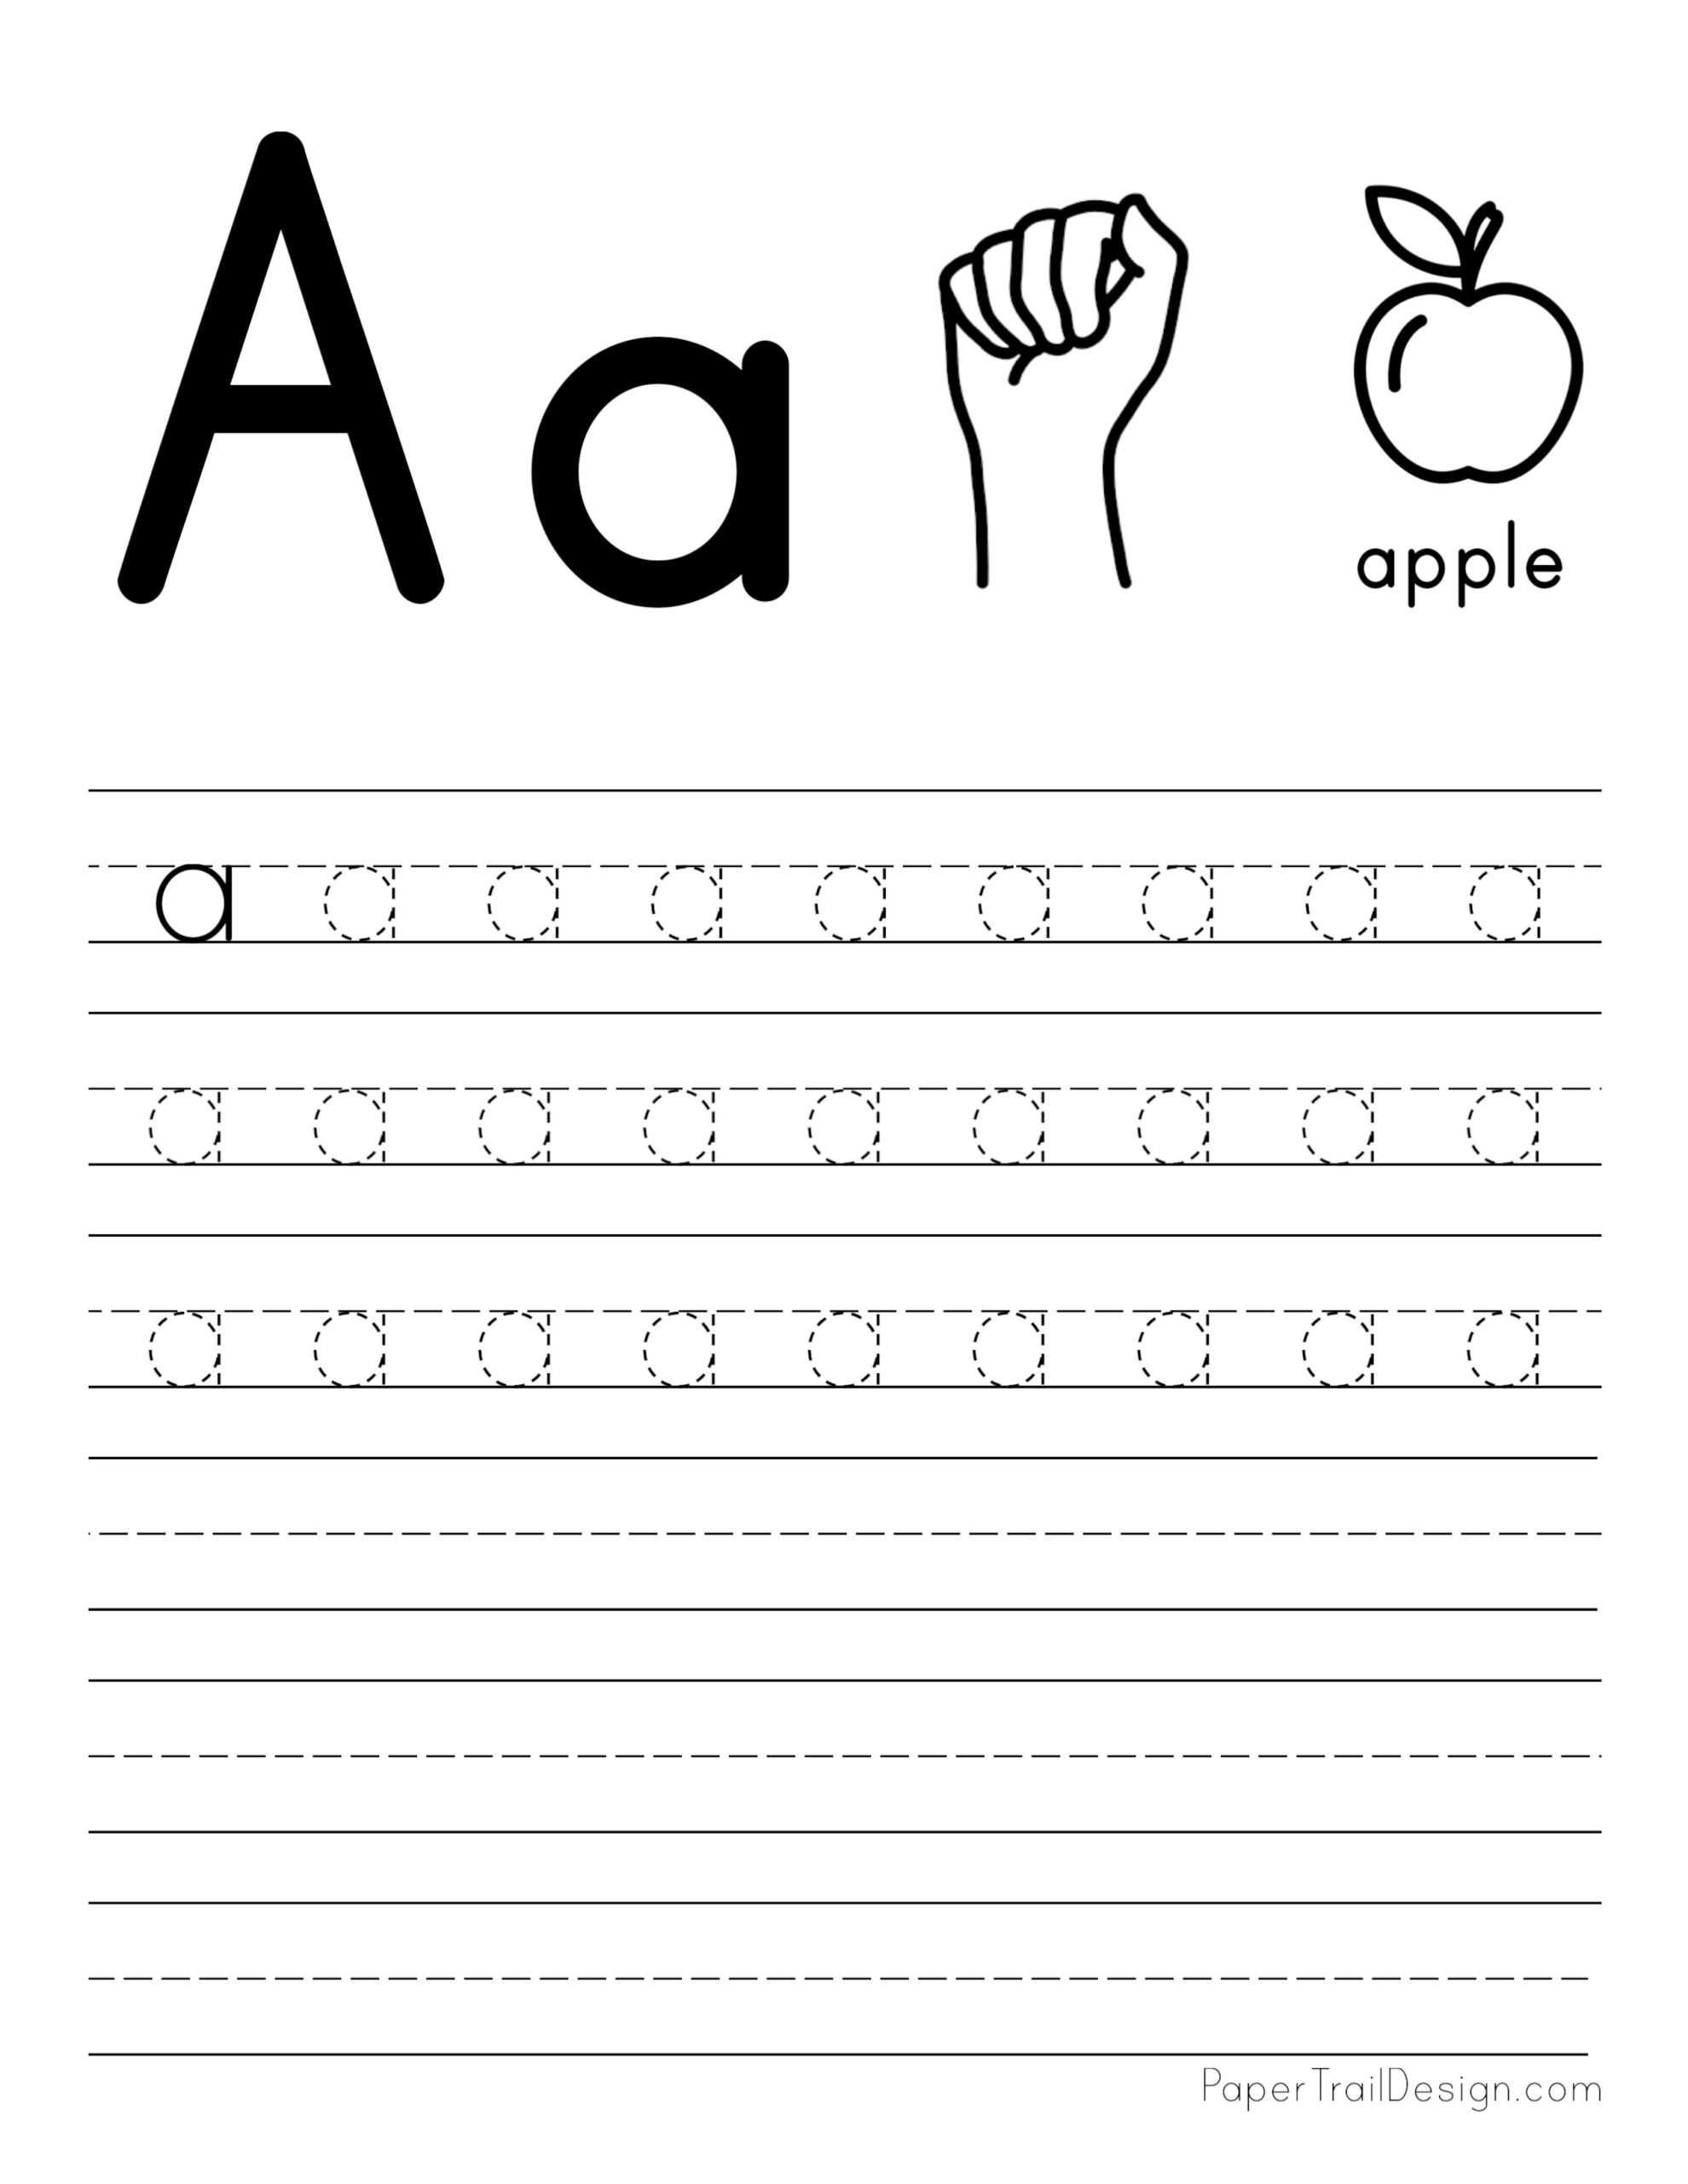 free-letter-tracing-worksheets-paper-trail-design